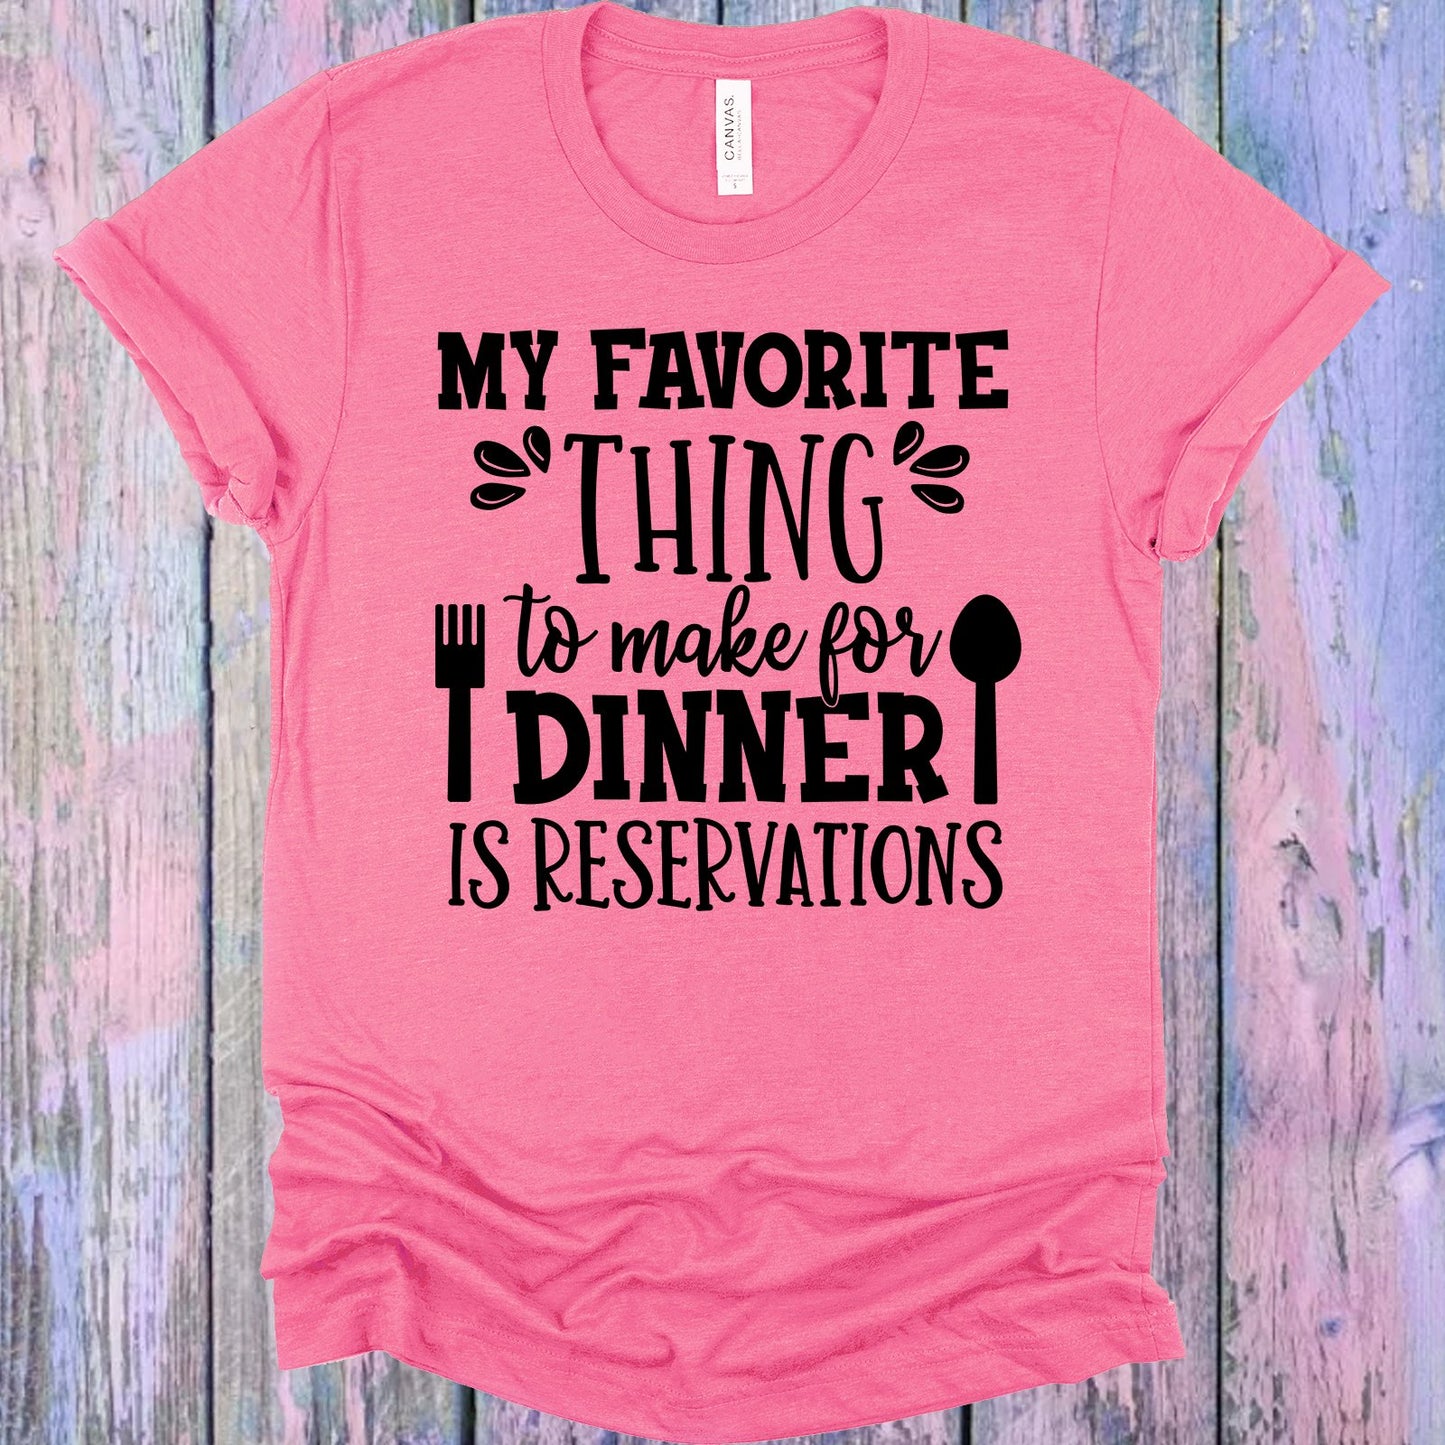 My Favorite Thing To Make For Dinner Is Reservations Graphic Tee Graphic Tee